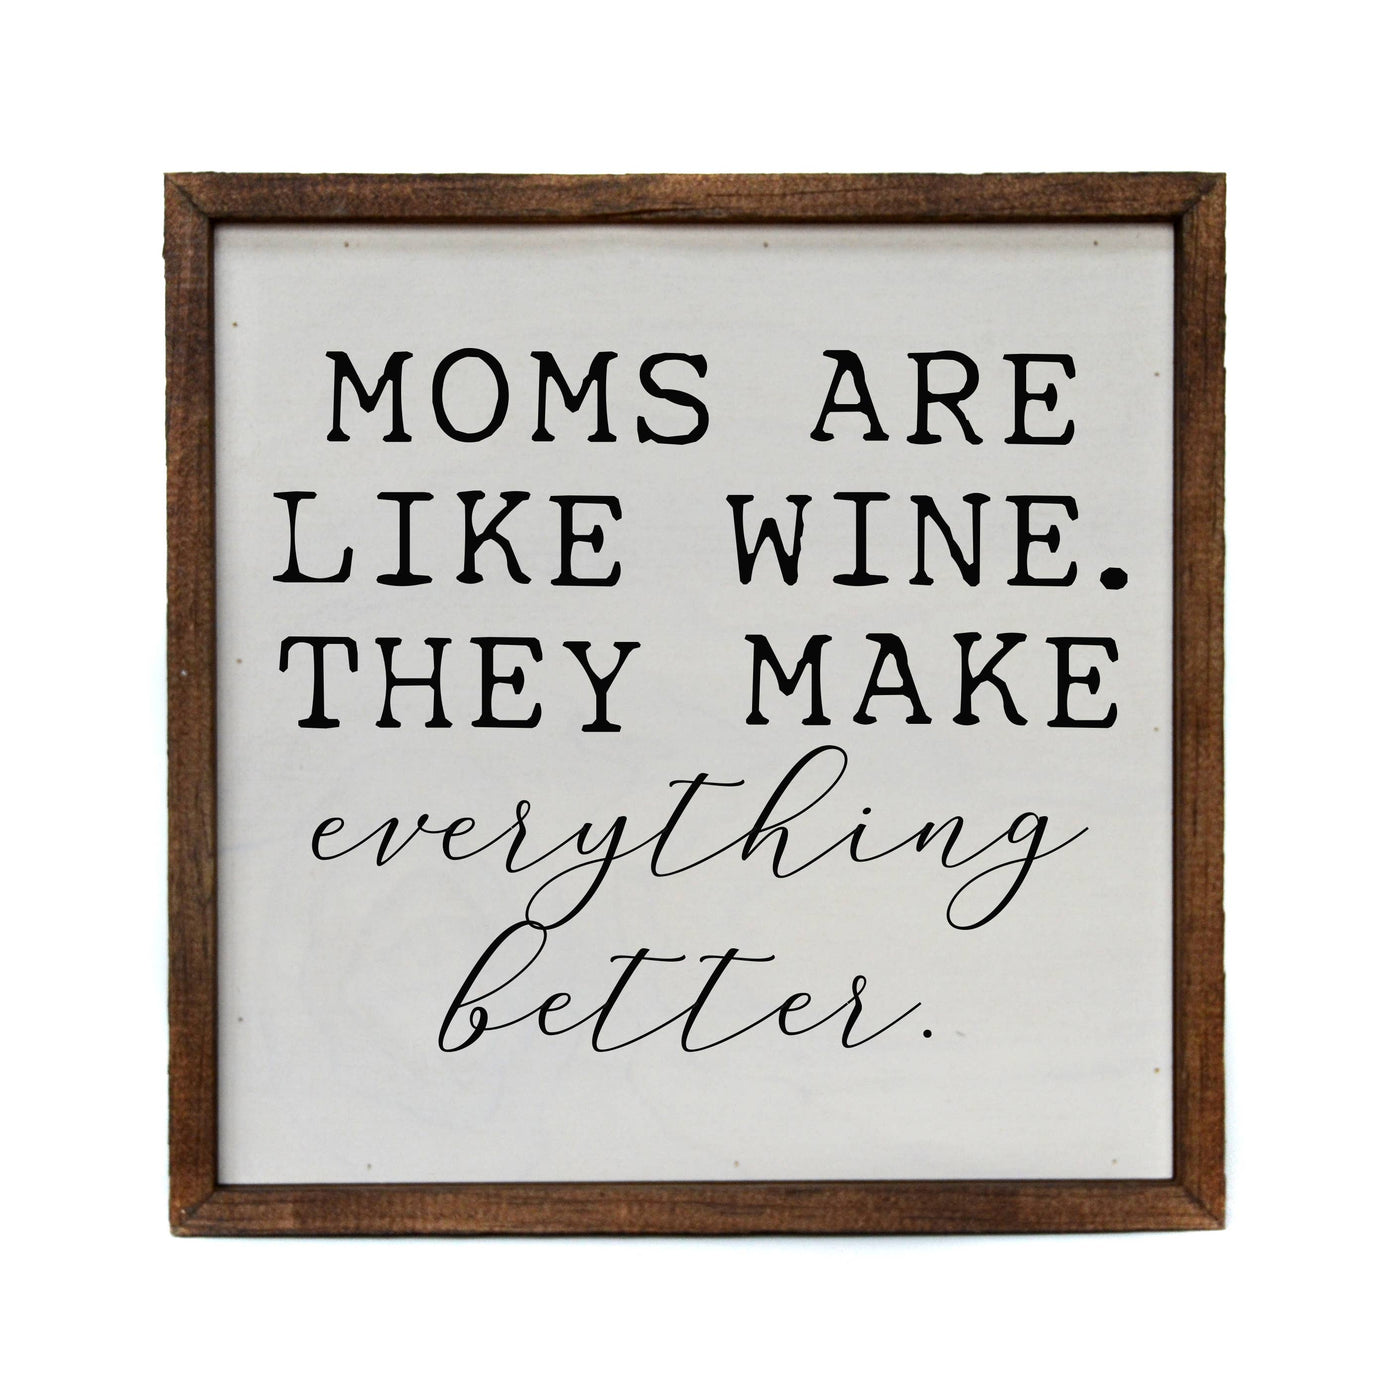 10x10 Moms Are Like Wine. They Make Everything Better Wood Sign - Ranch Junkie Mercantile LLC